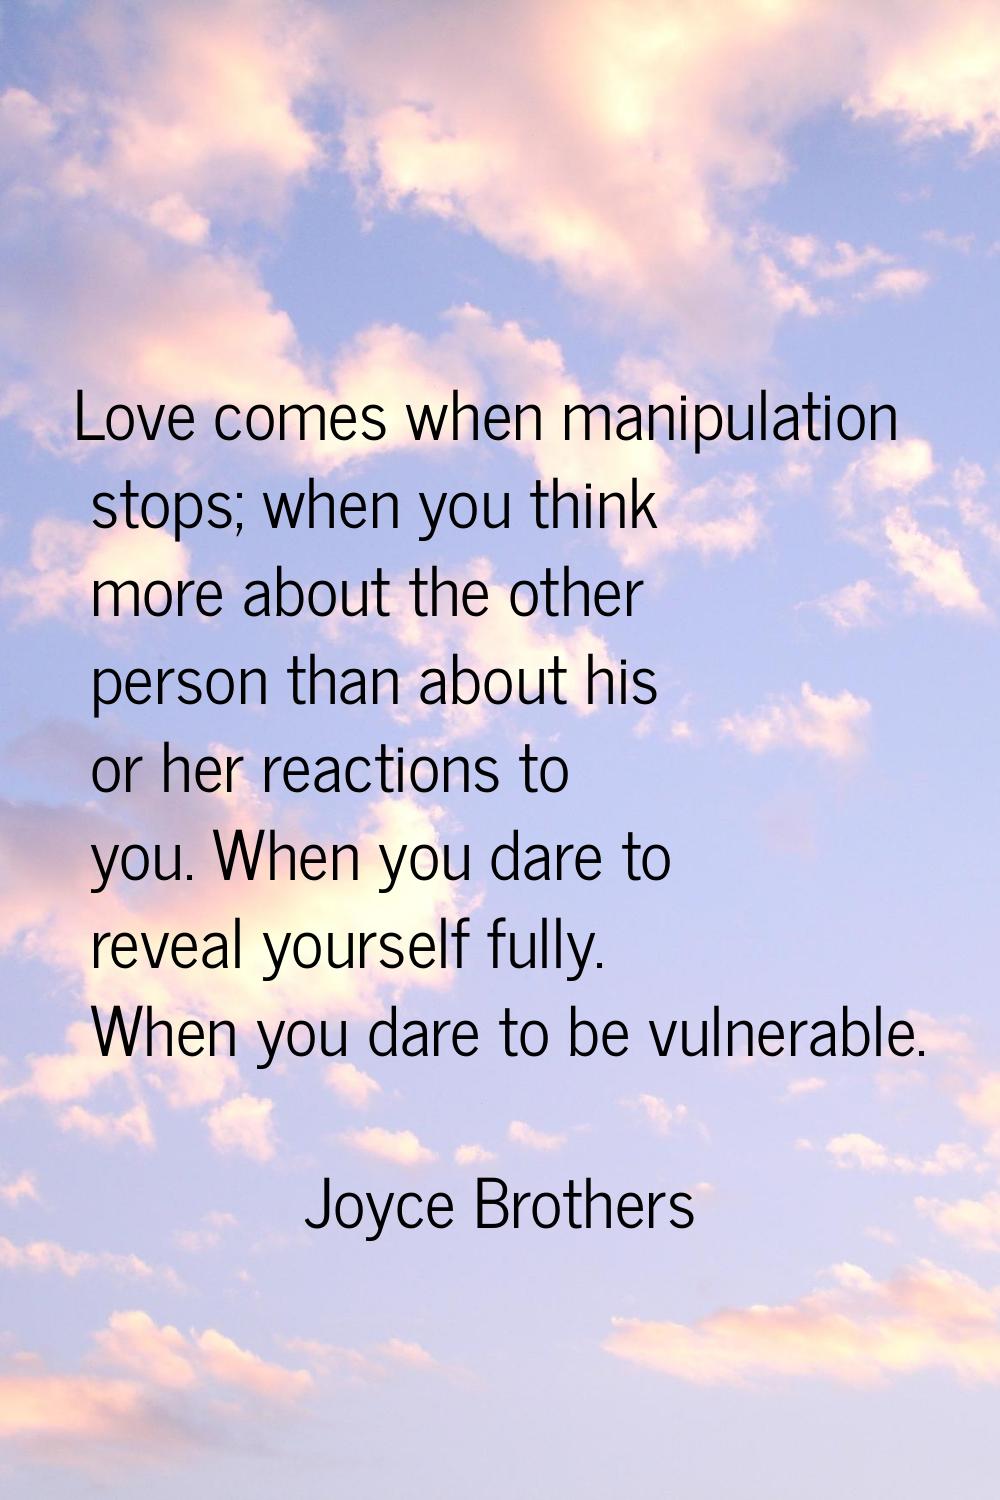 Love comes when manipulation stops; when you think more about the other person than about his or he